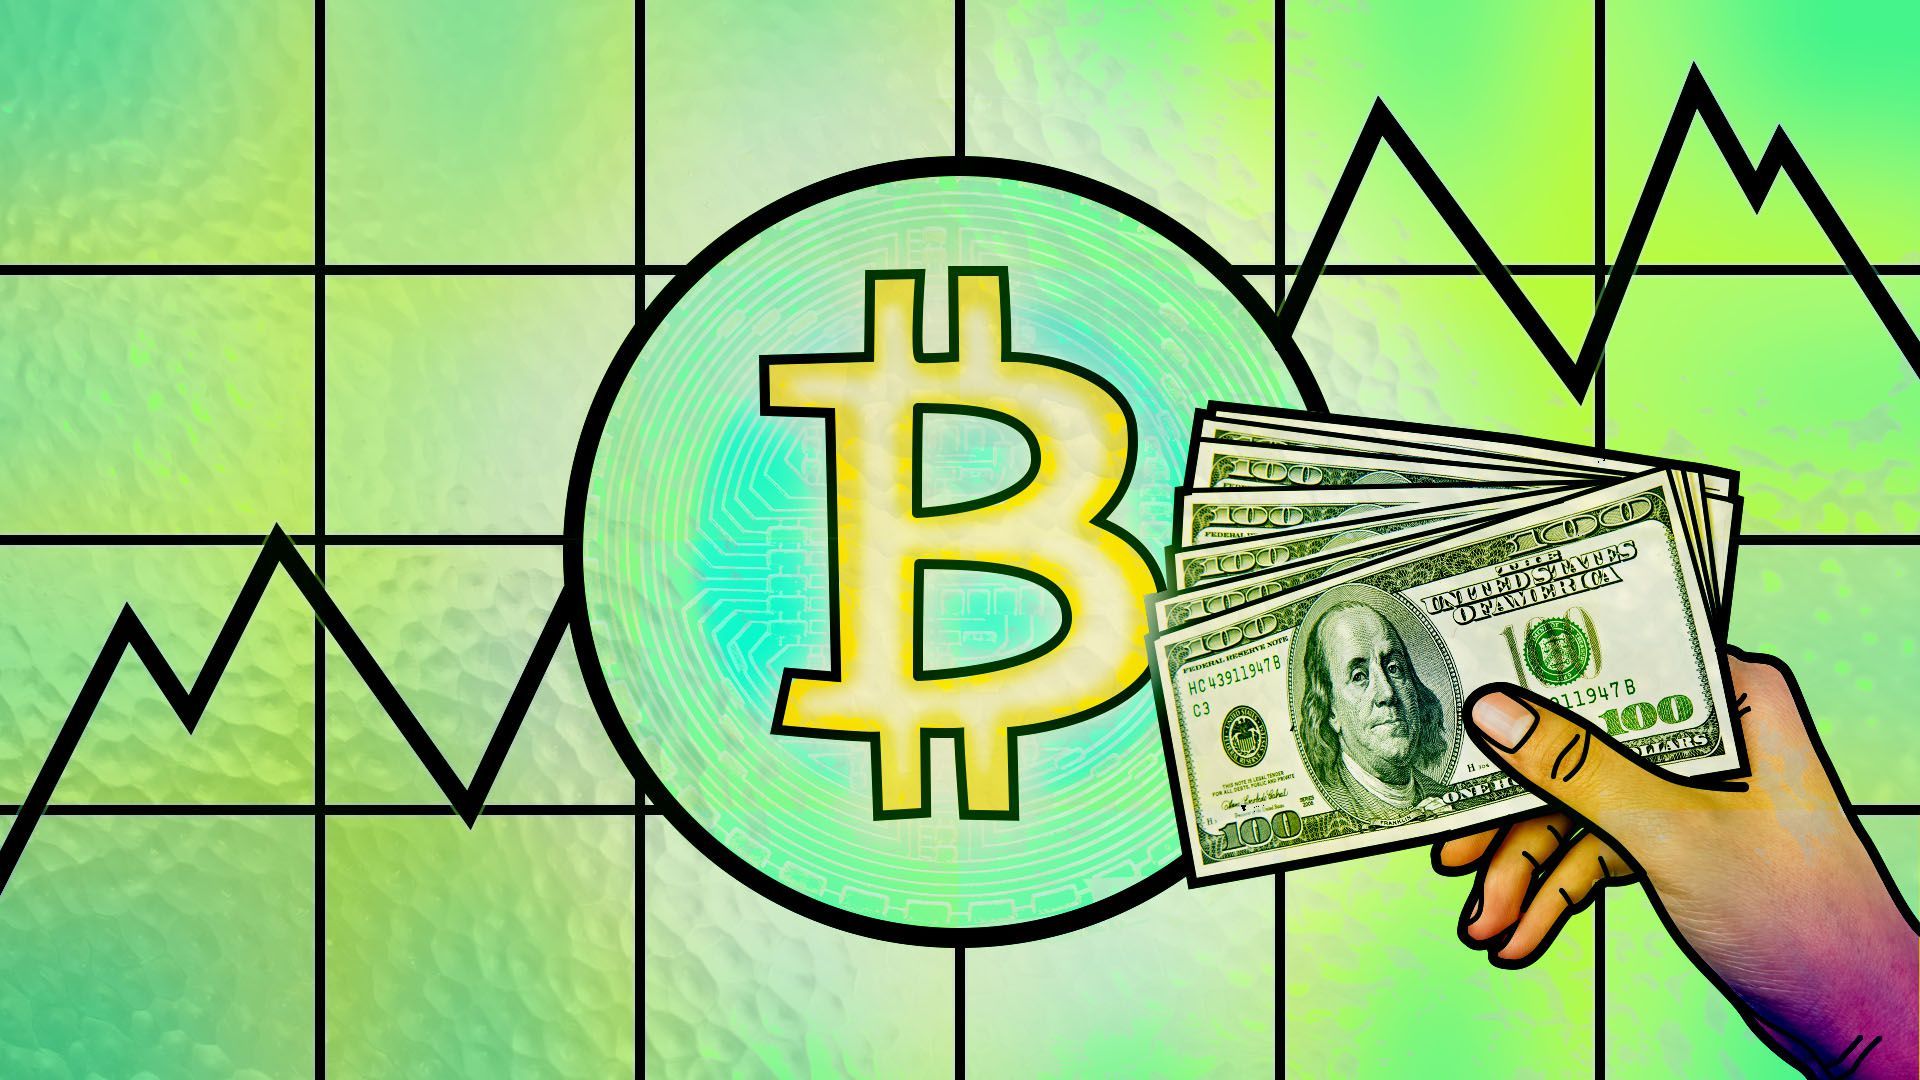 Illustration of the Bitcoin logo as stained glass panel